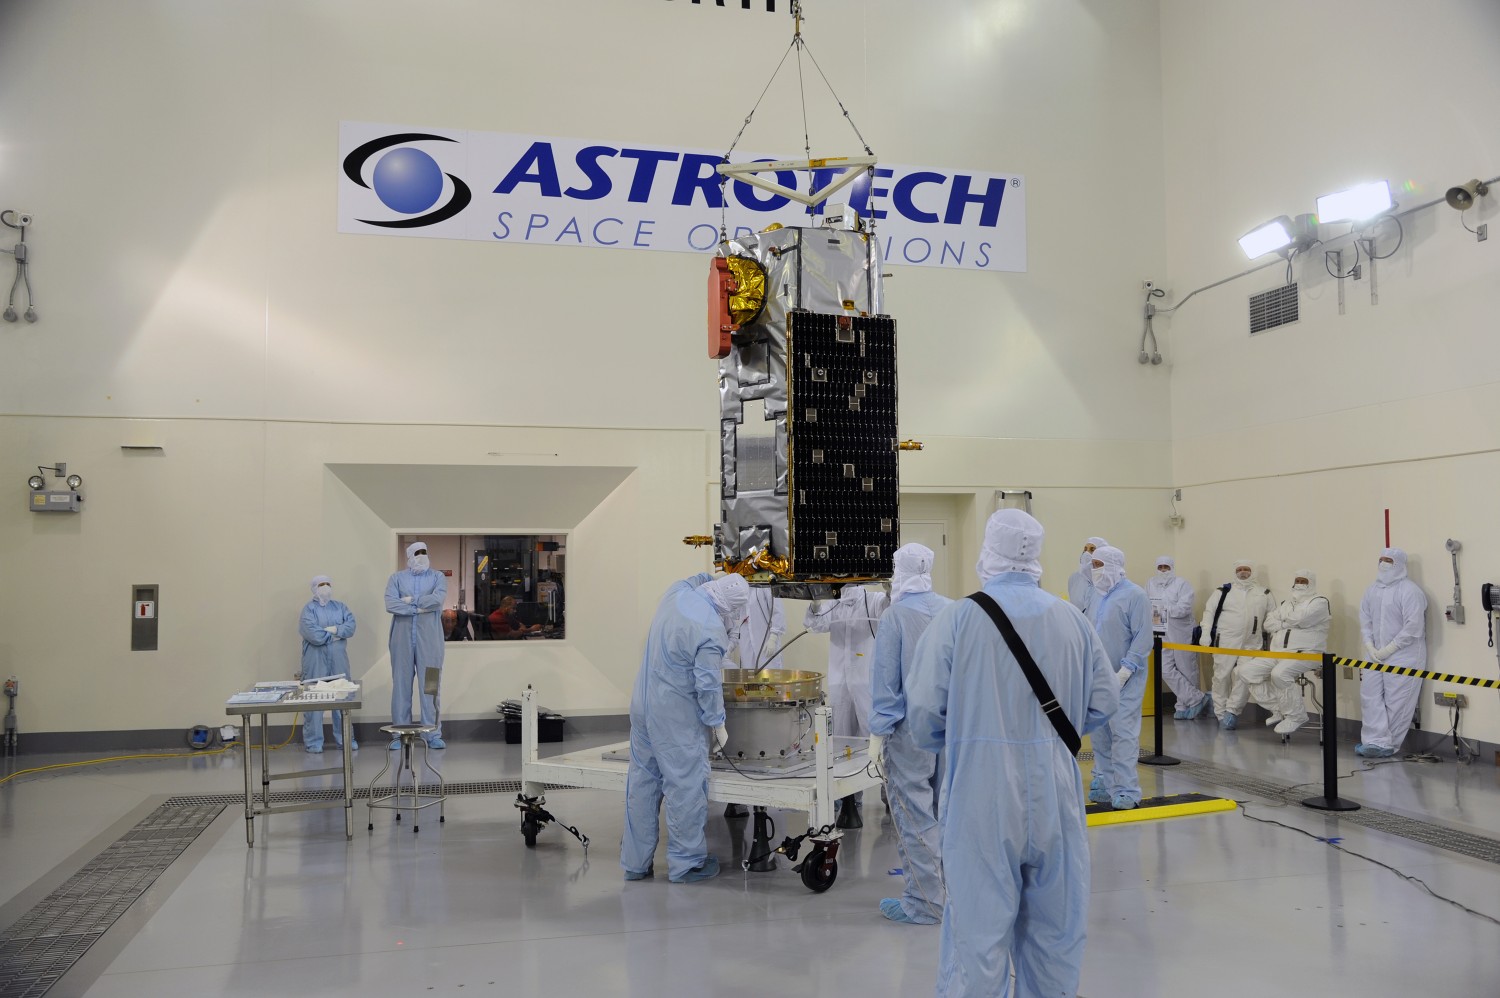 Adstrotech Space Operations